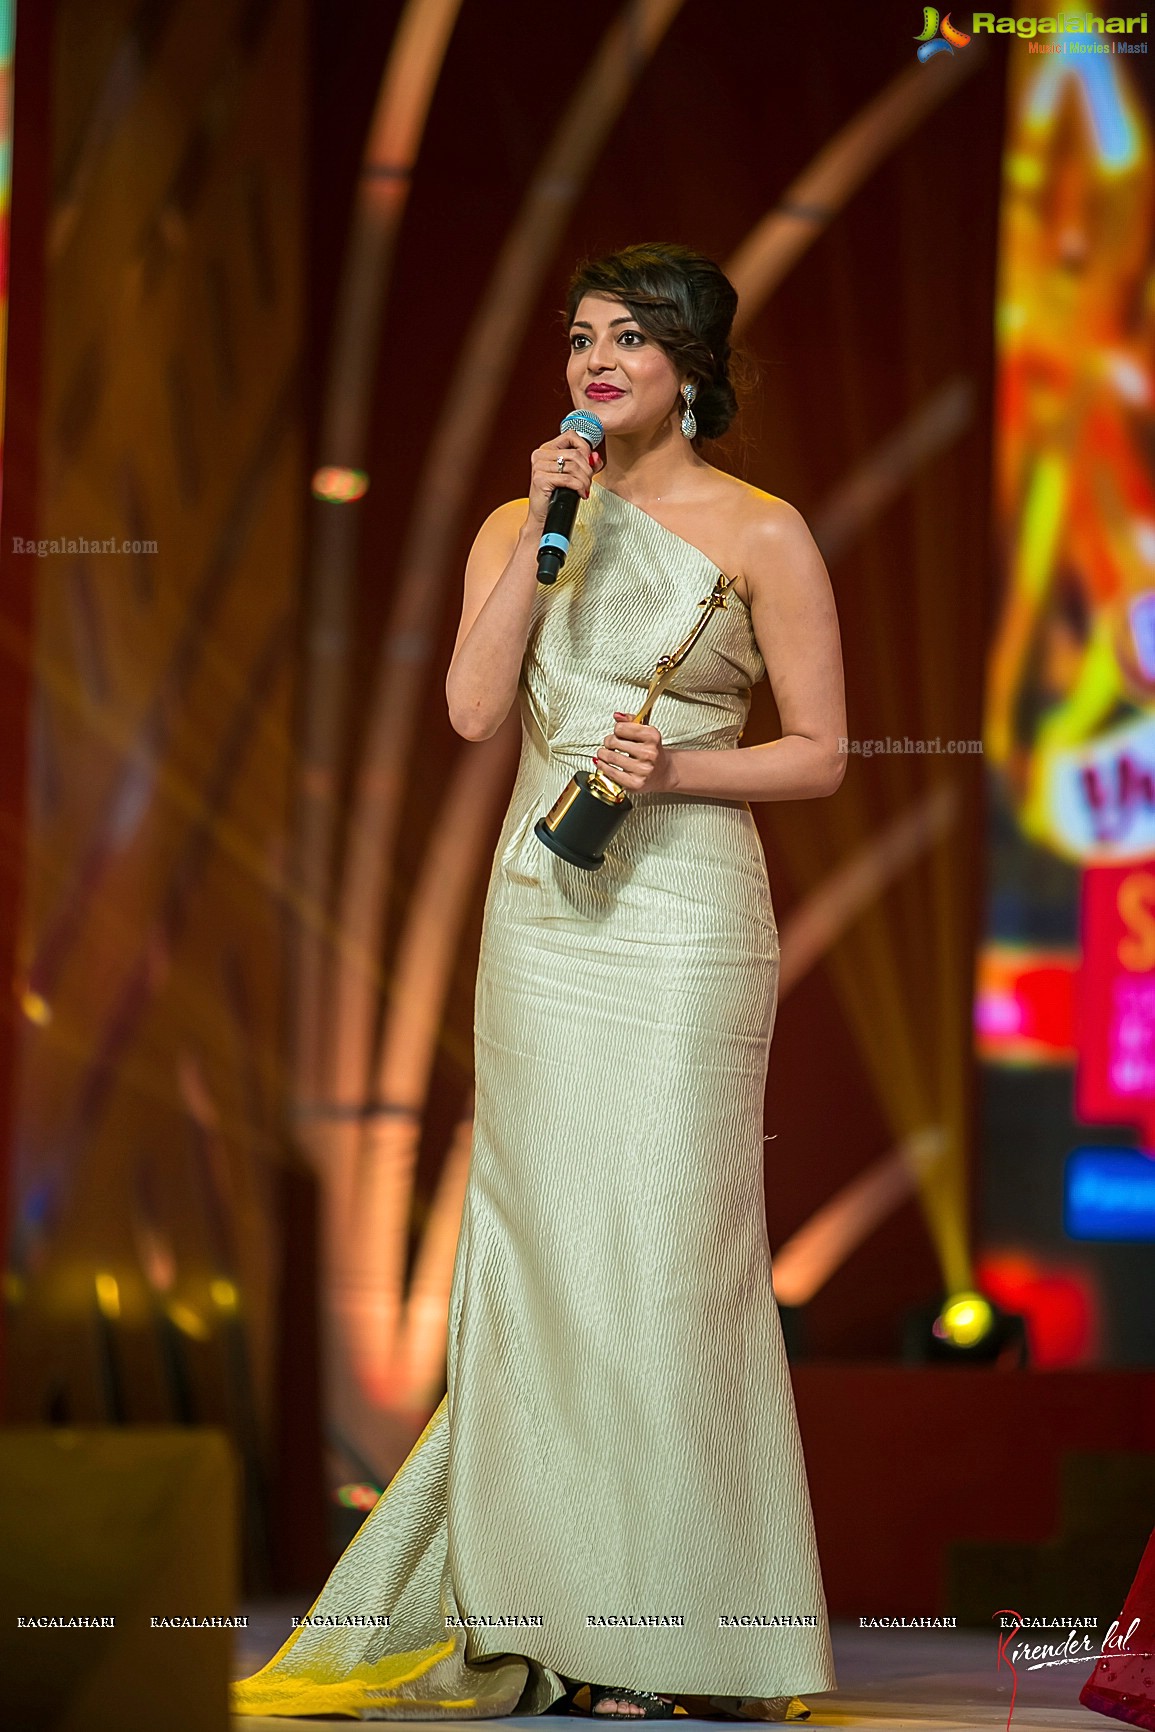 Kajal Aggarwal at SIIMA 2013 - Exclusive Photo Gallery, Images